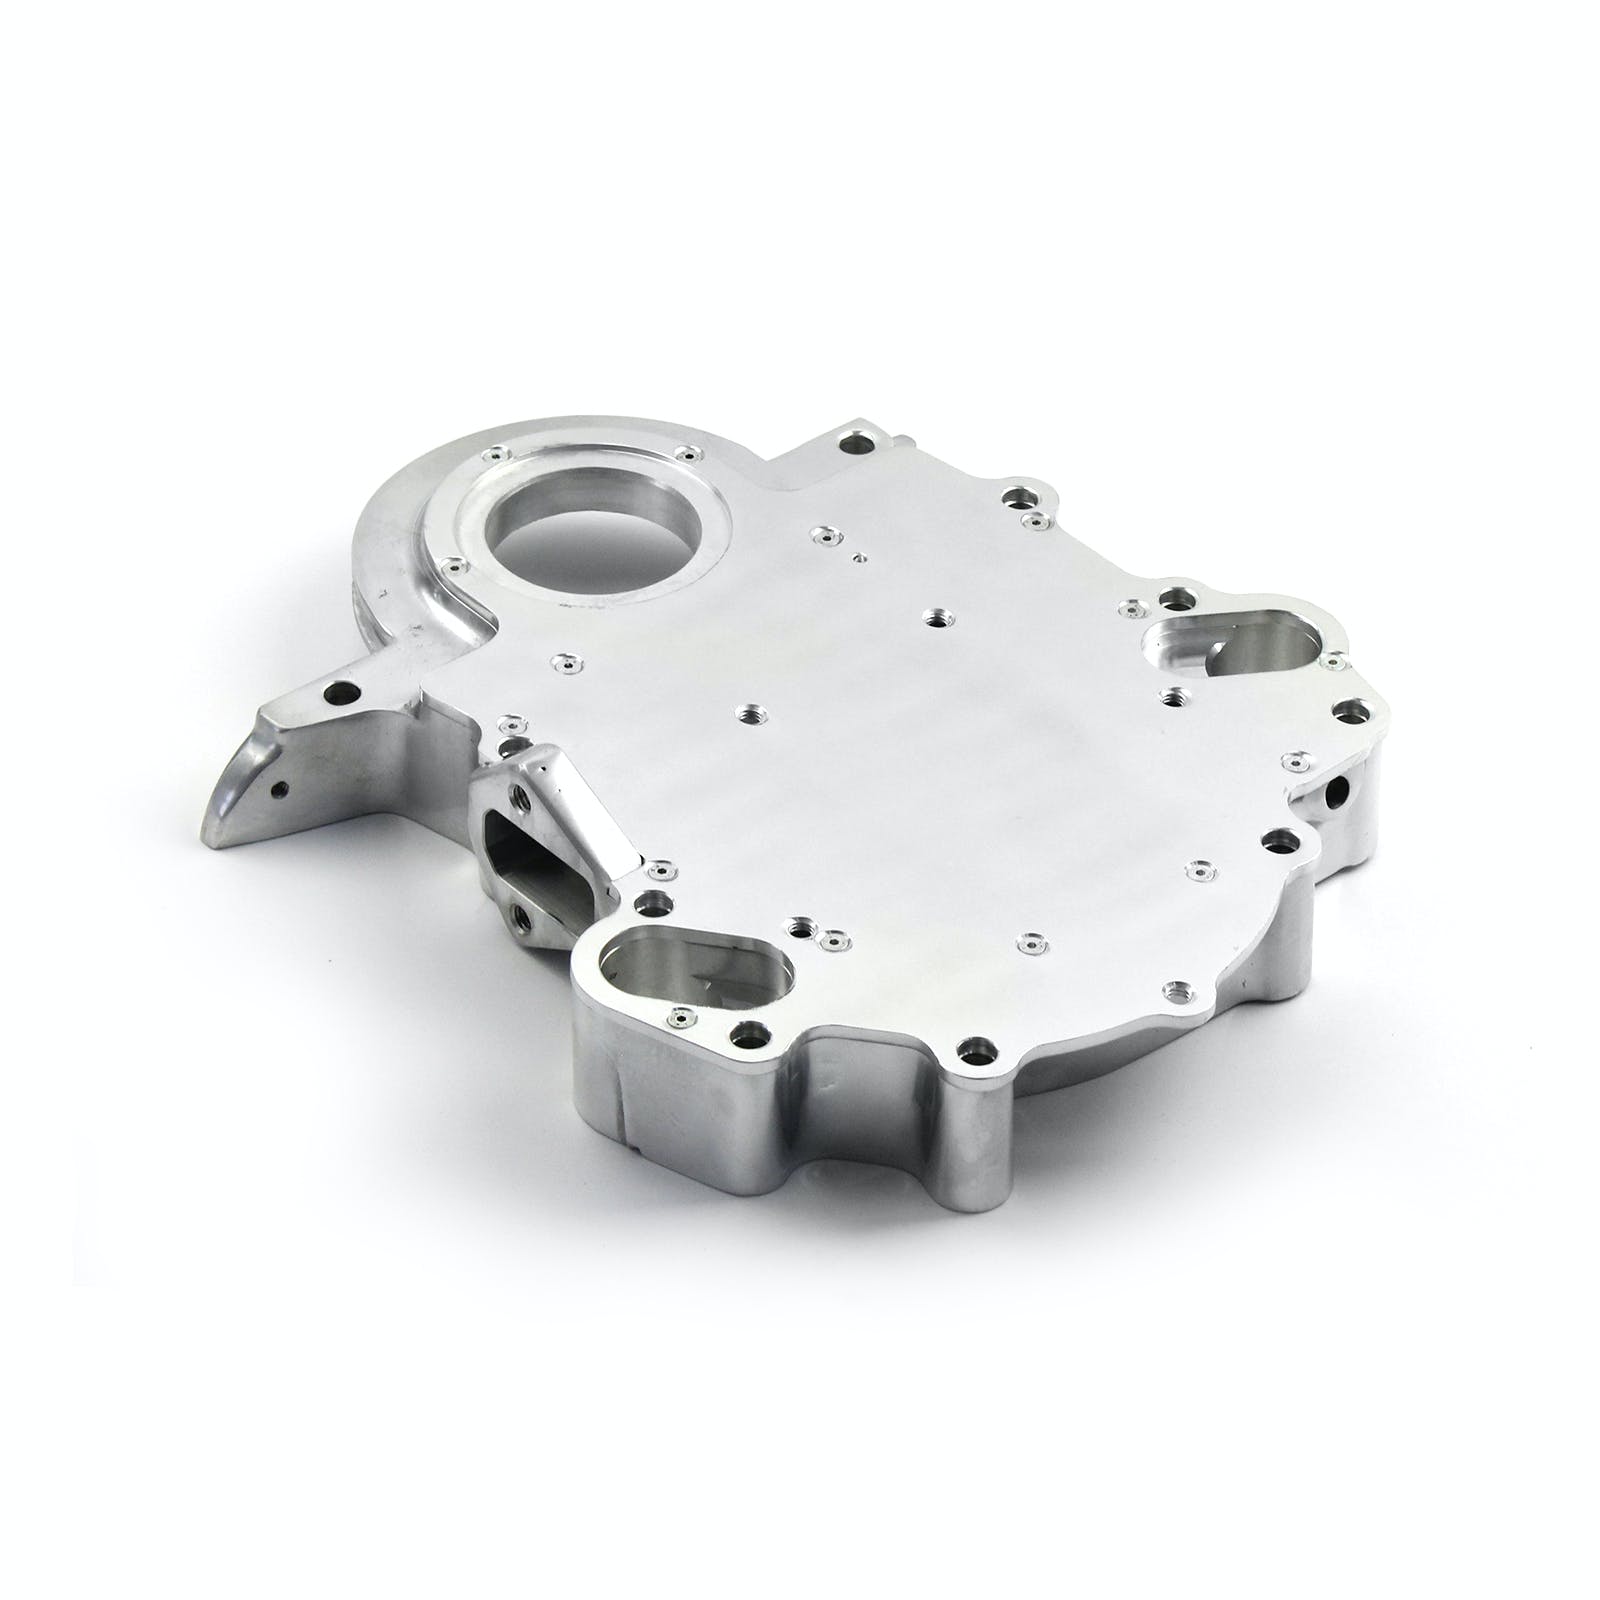 Speedmaster PCE265.1060 2-Pc Removable Front Aluminum Timing Chain Cover Polished